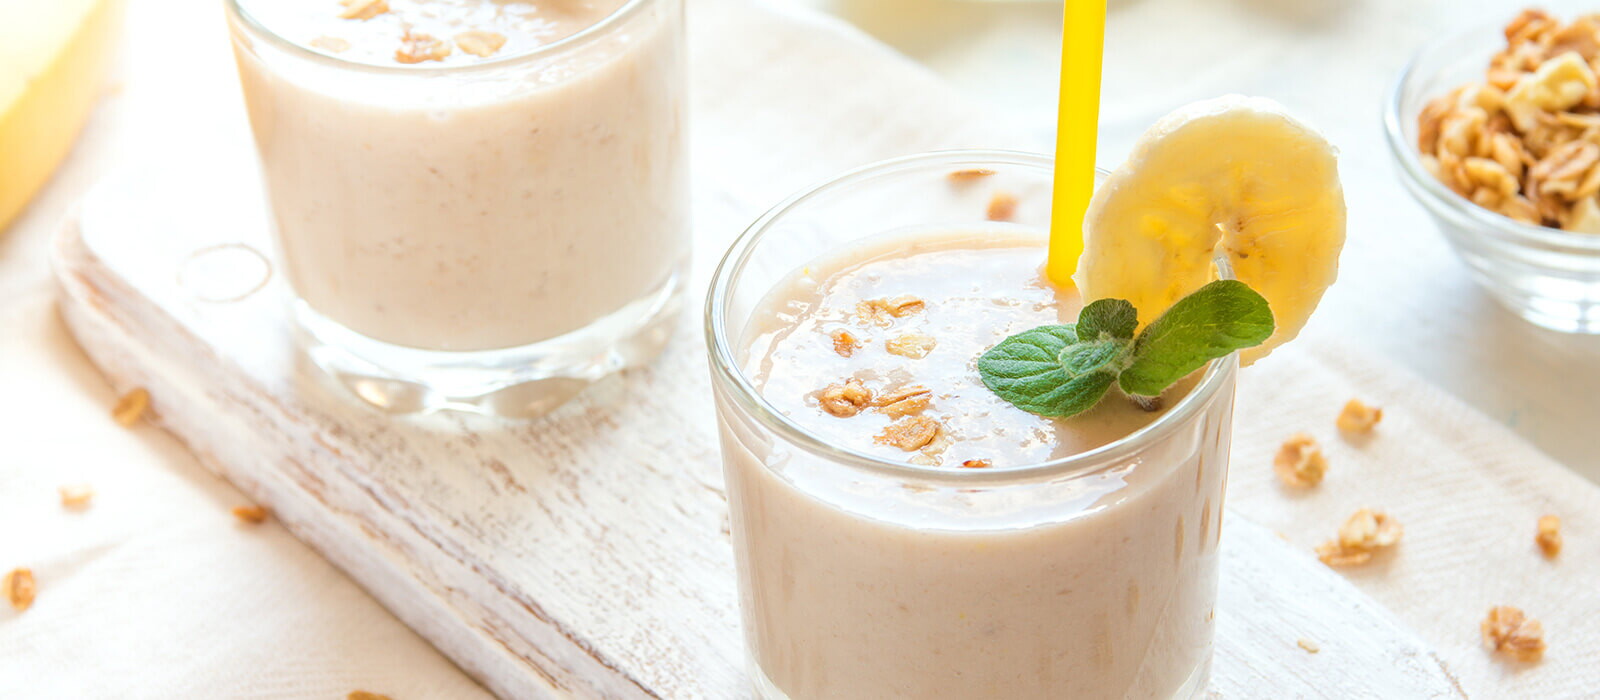 Banana-&-Peanut-Butter-Smoothie